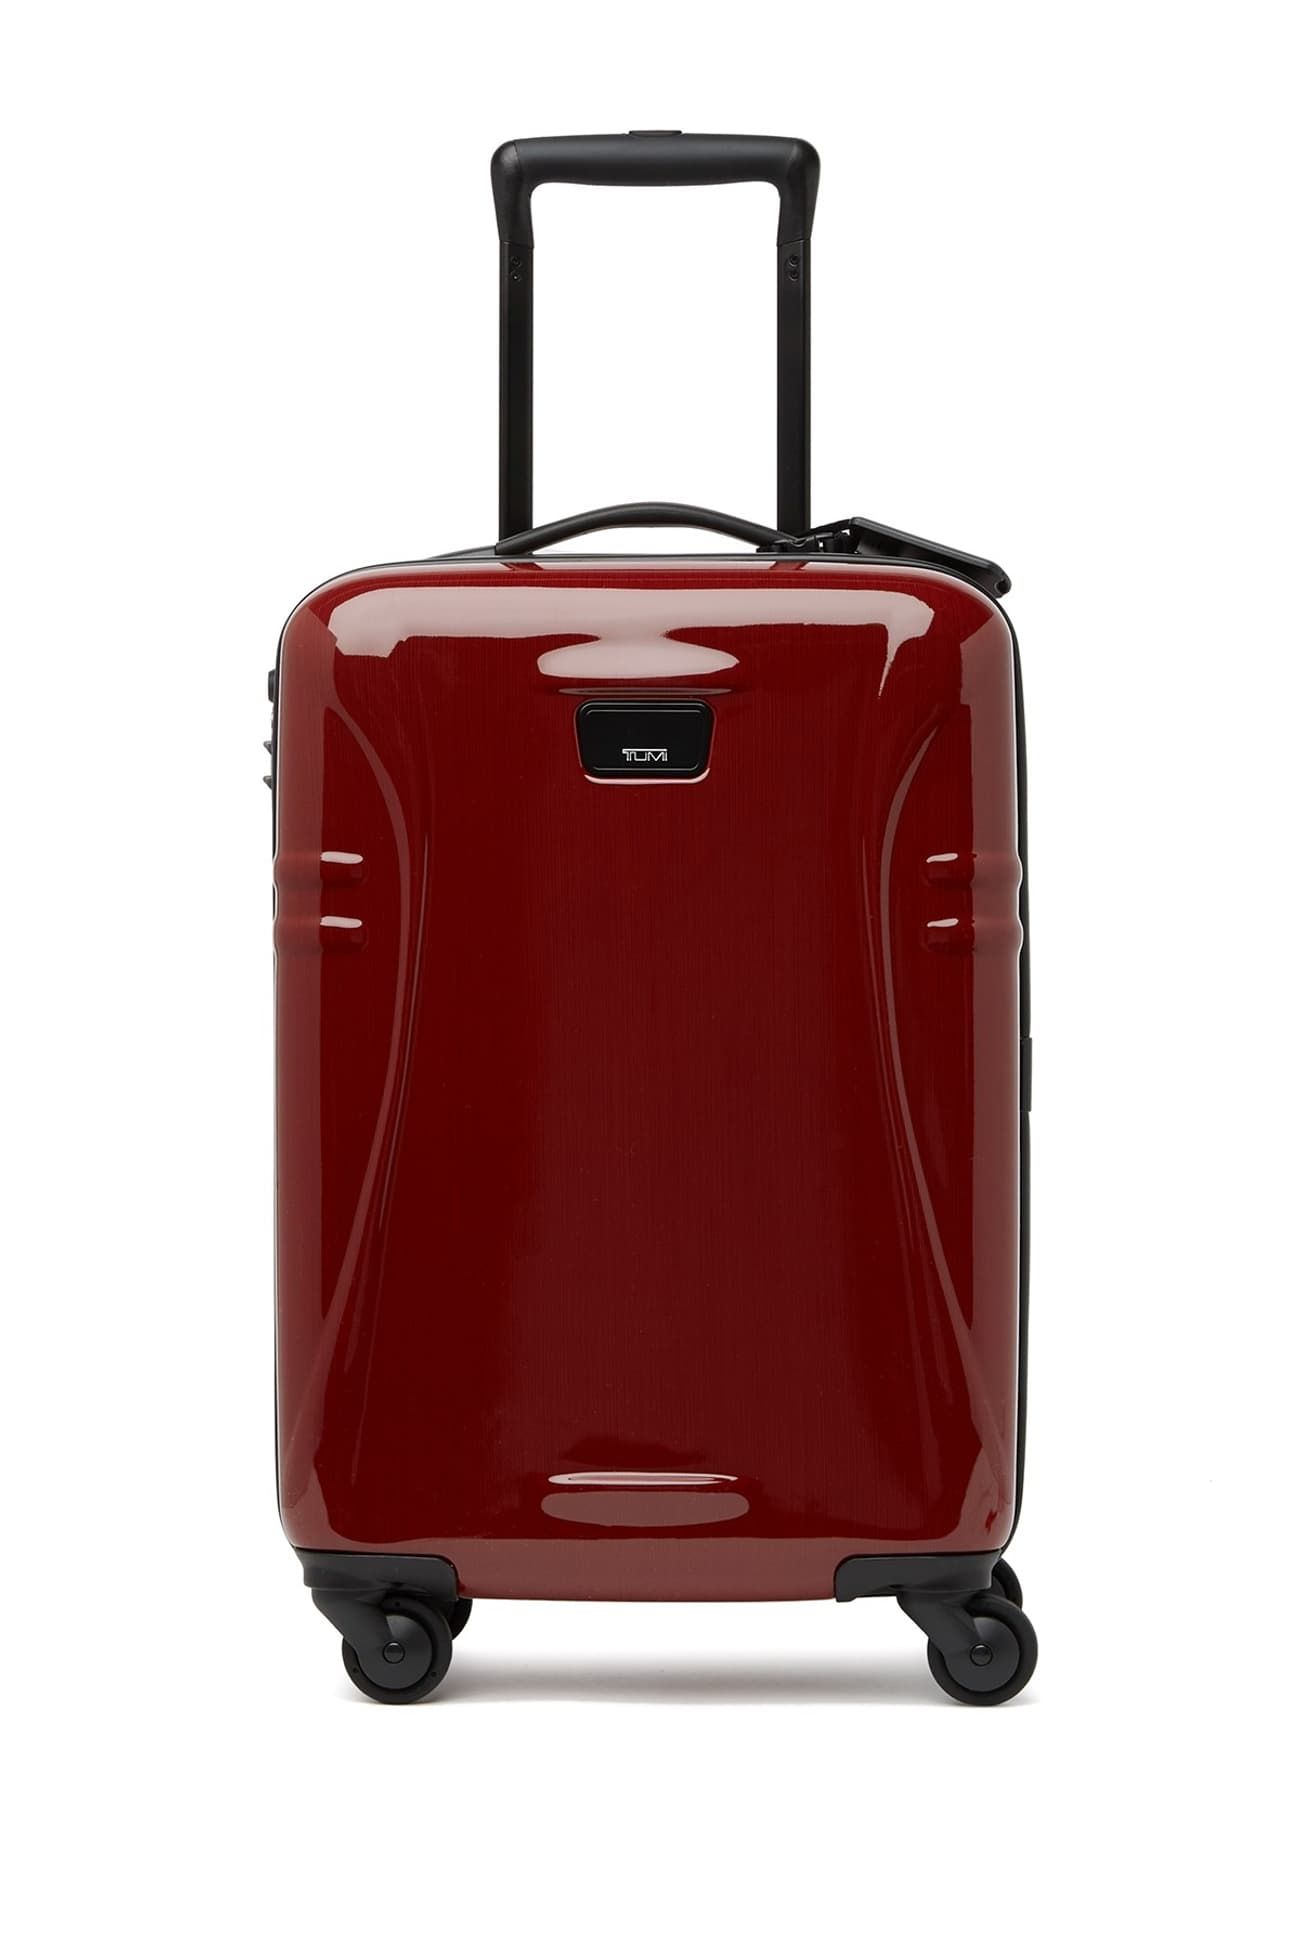 TUMI luggage is up to 50% off with the Nordstrom Rack 3-Day Flash Sale